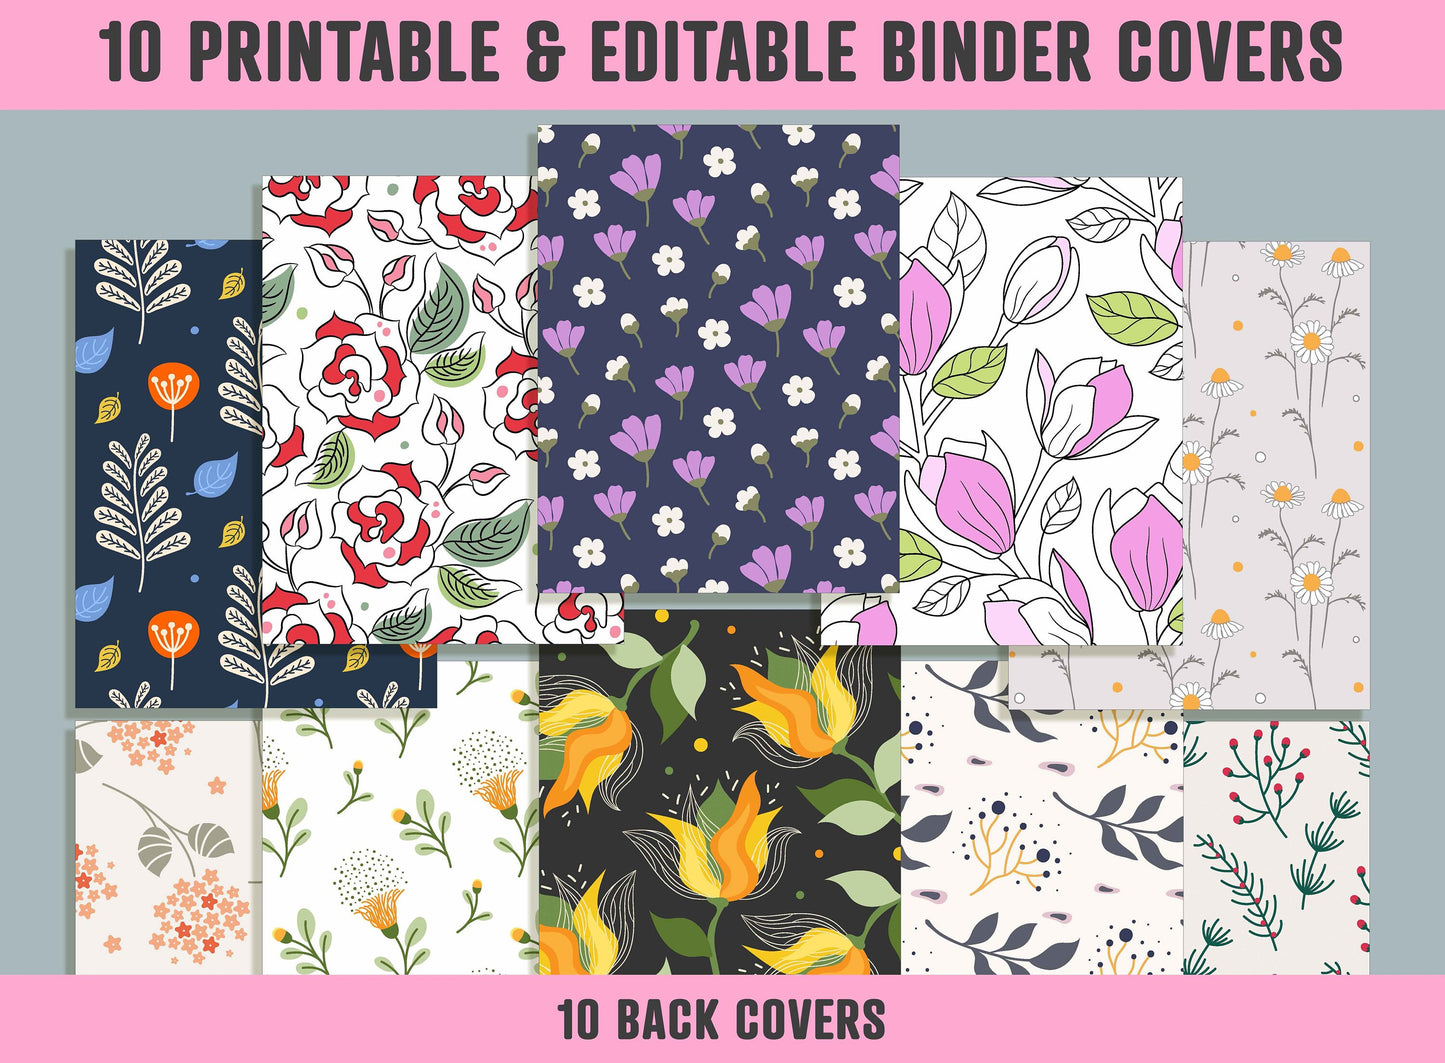 Floral Leaves and Geometric Shapes Binder Cover, 10 Printable/Editable Covers + Spines, Planner Template, Teacher/School Binder Label/Insert